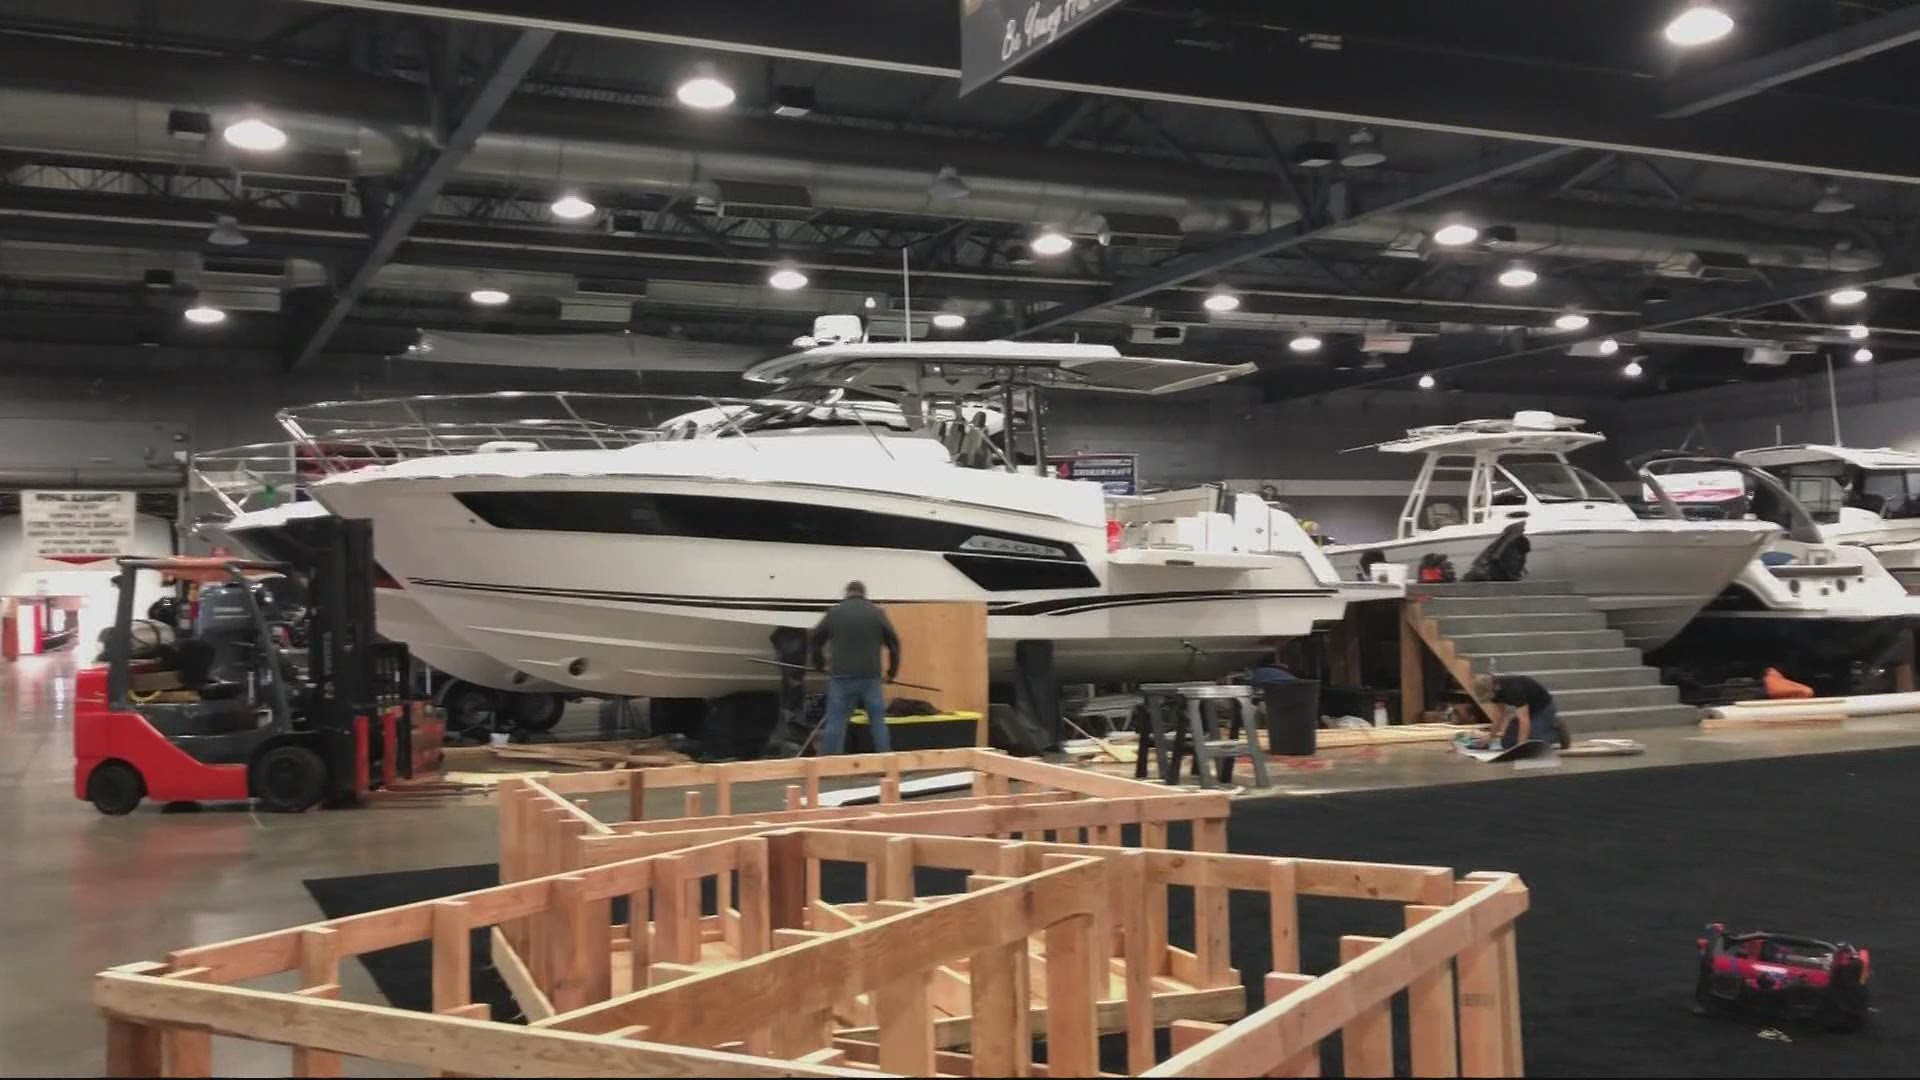 The Pacific Northwest Sportsmen’s show and Portland Boat Show kick off at the Expo Center for the first time in more than a year.